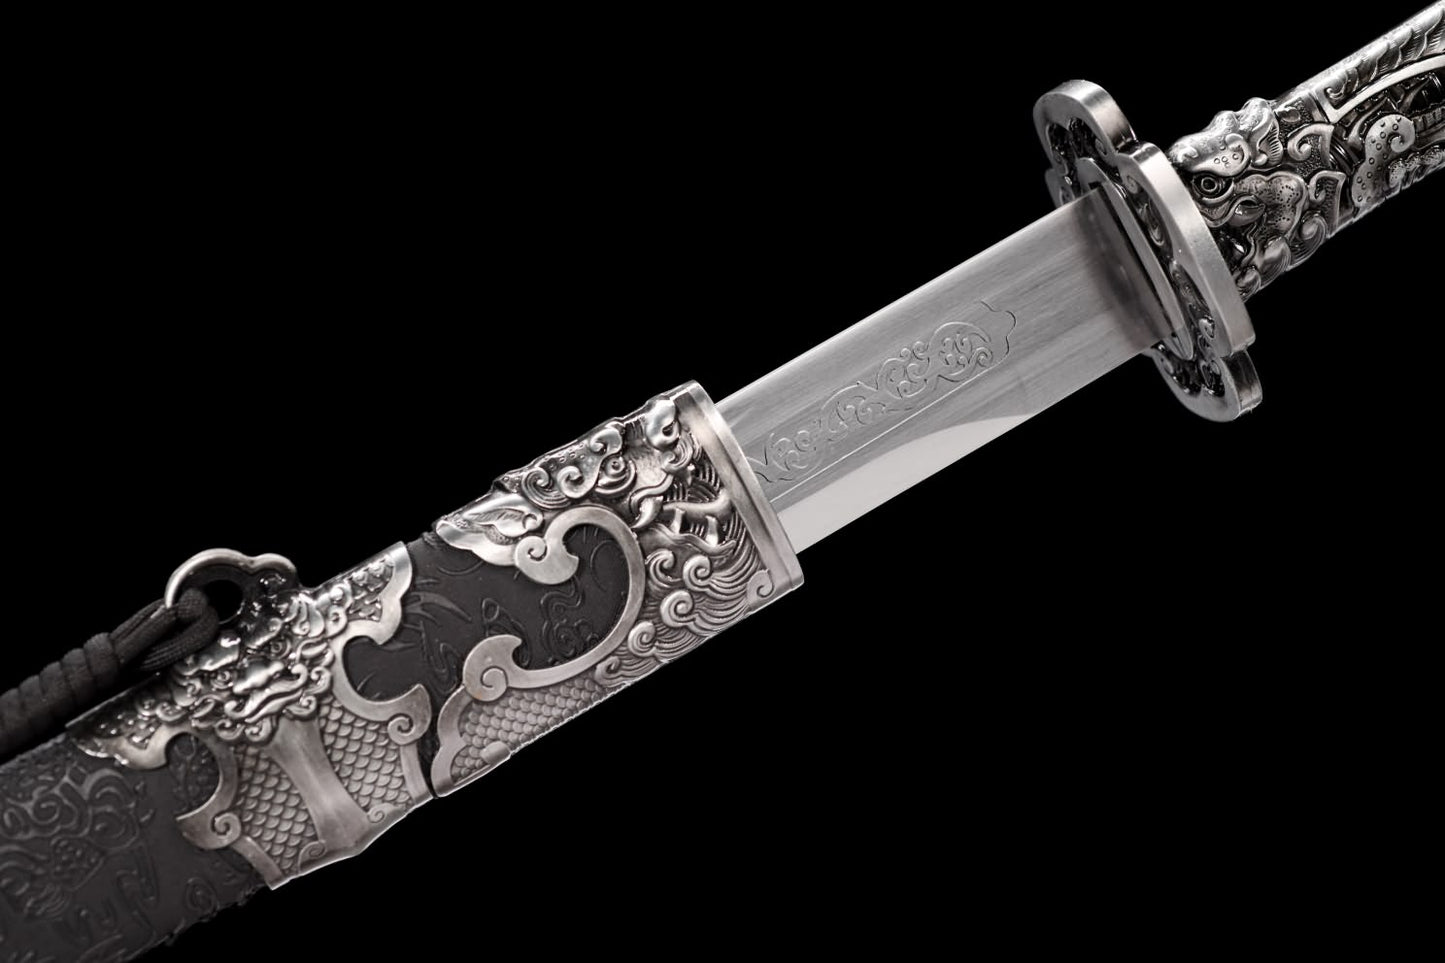 Qing dao Sword - Hand Forged High Carbon Steel Blade Blade with Alloy Fittings